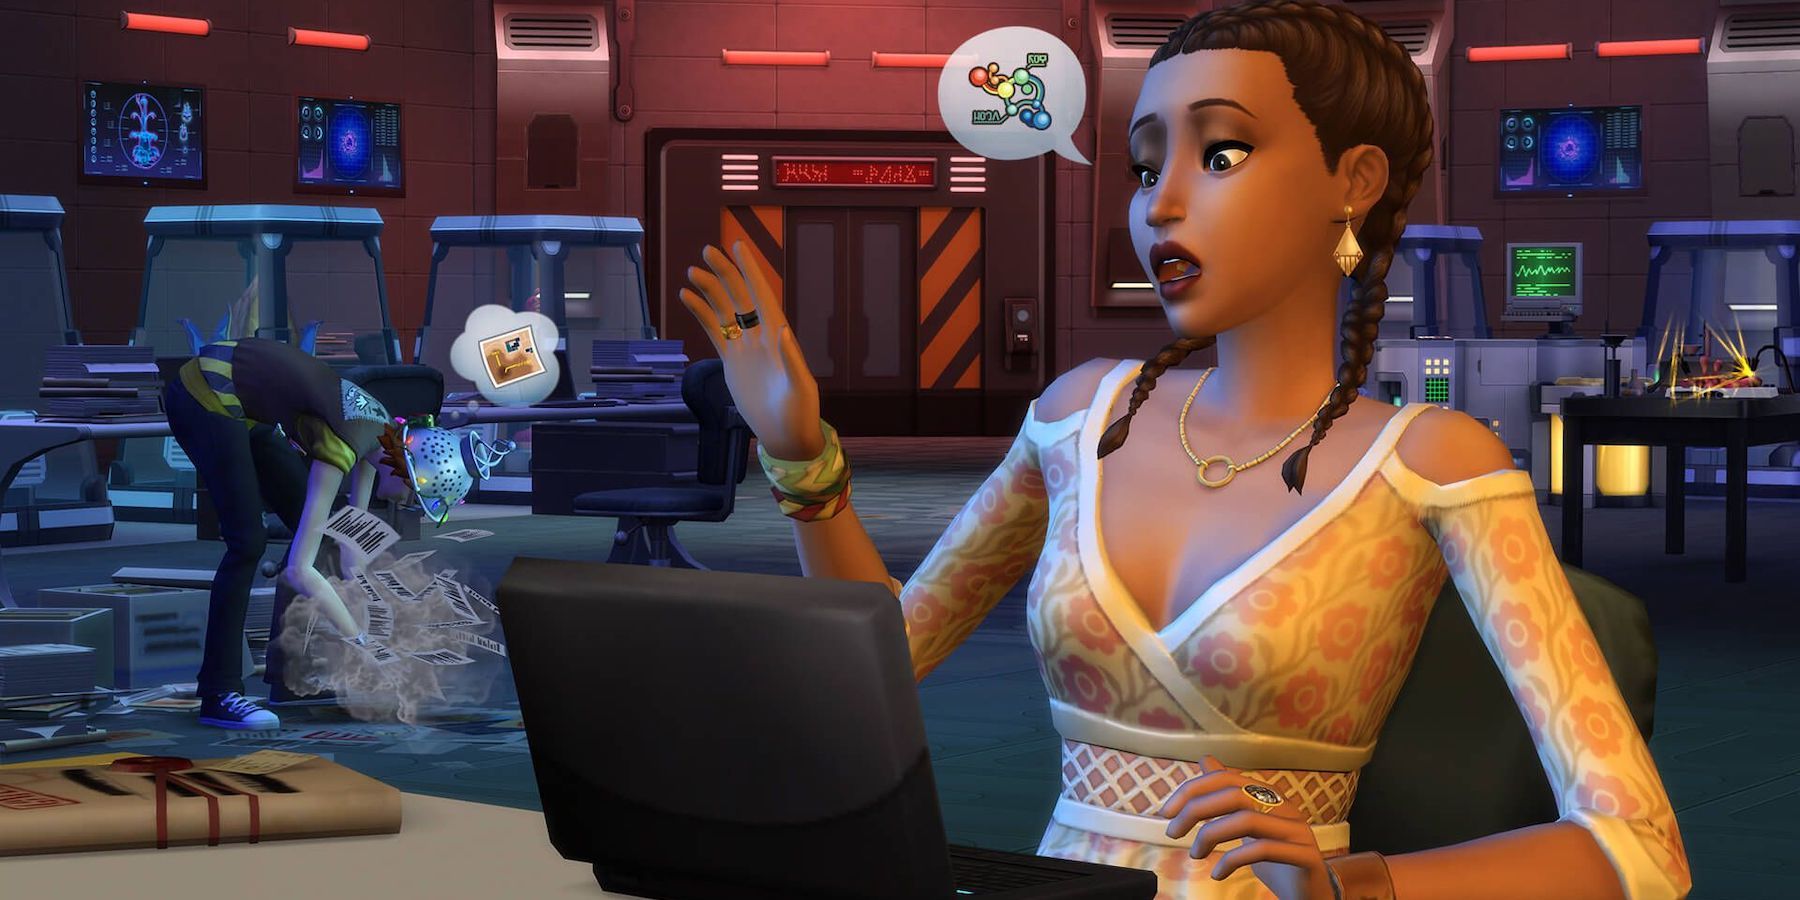 The Sims 4 Leak Reveals Next Game Pack Details